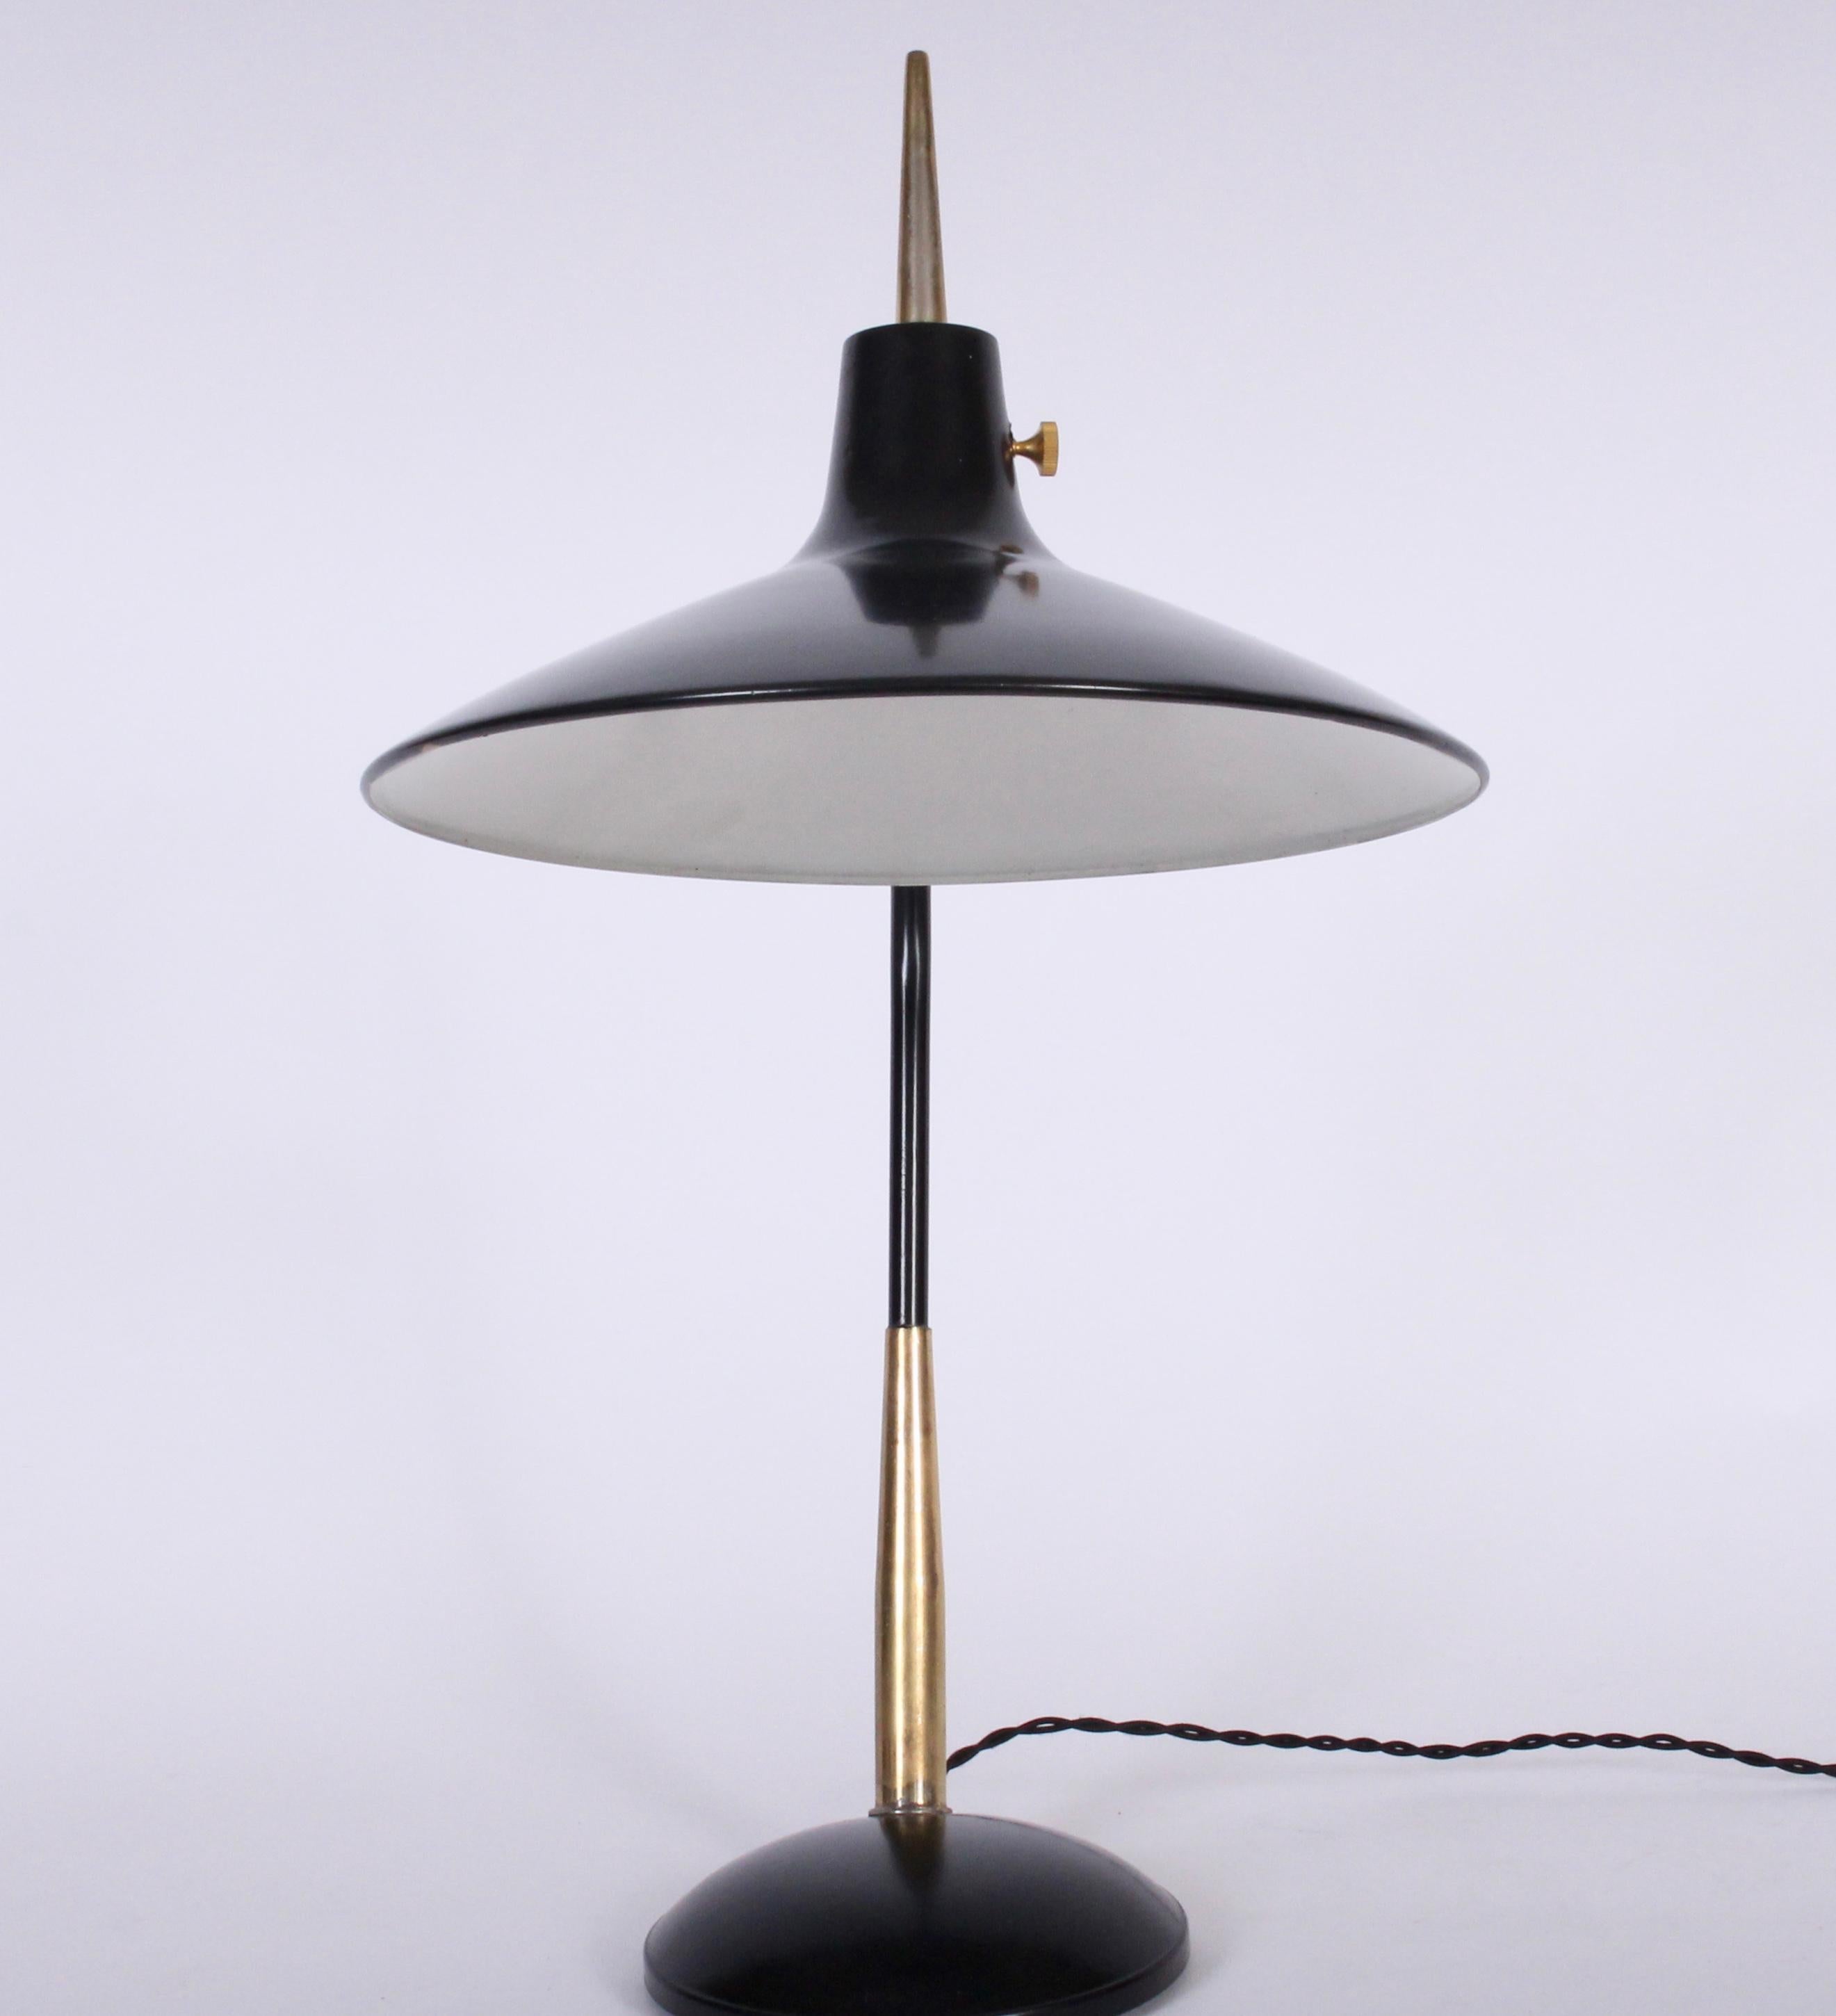 Enameled Gio Ponti for Laurel Lamp Co. Black and Brass Desk Lamp with Black Enamel Shade